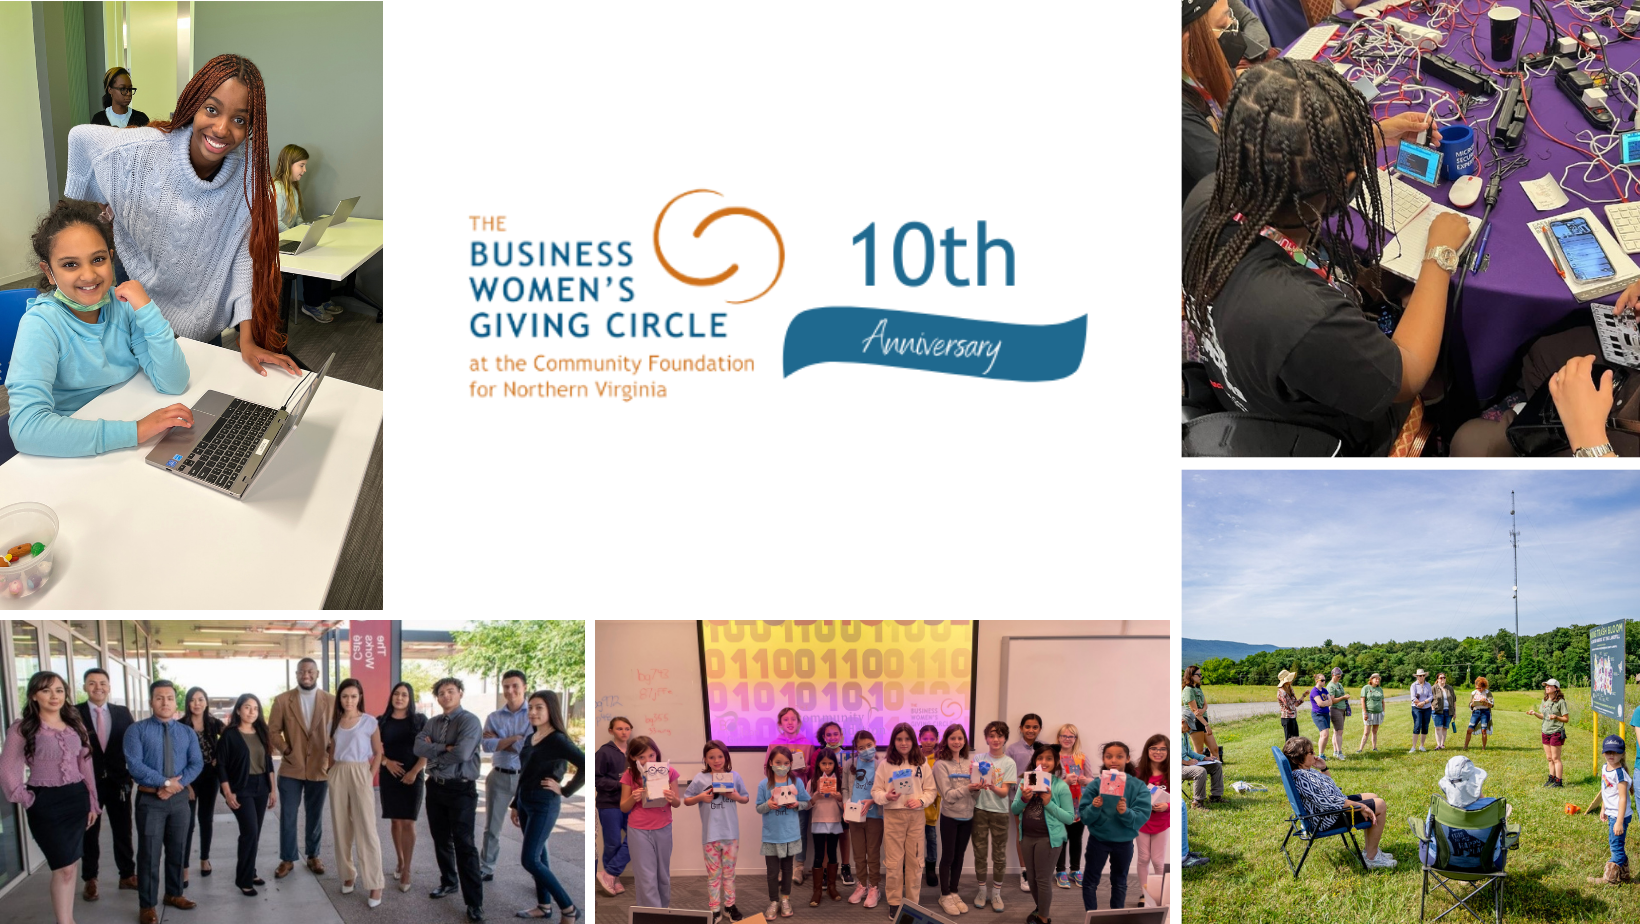 A photo collage of recent BWGC grantees including Boolean Girl, Sustainability Matters, Black Girls Hack, and others. There is a 10 year anniversary logo in the top center of the image.